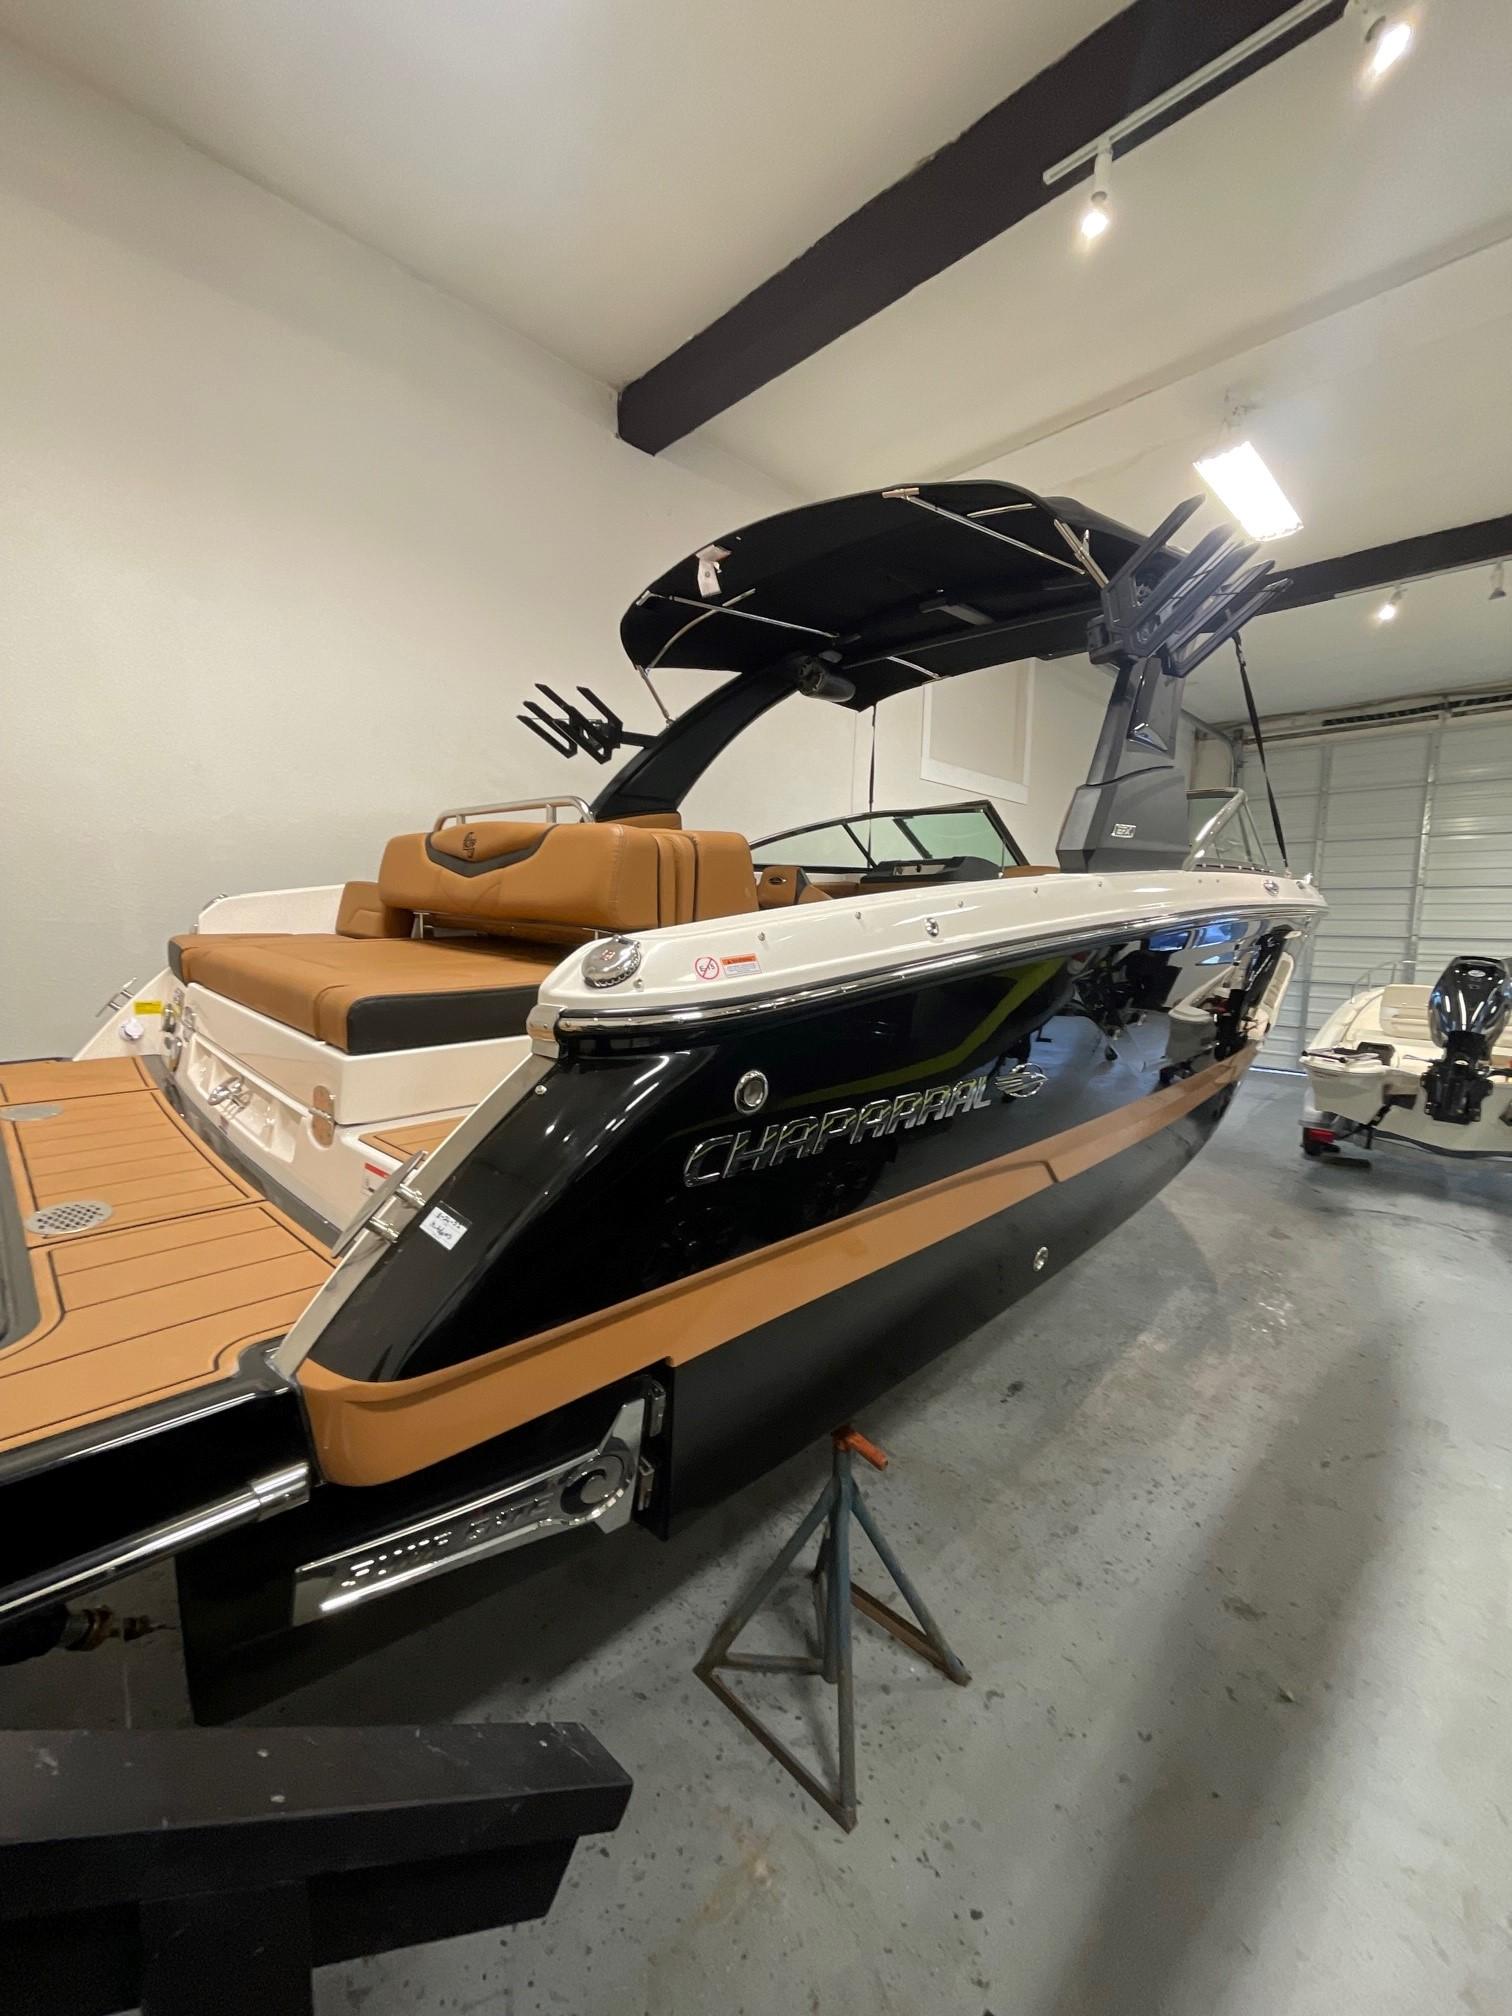 2023 Chaparral 26 Surf Ski and Wakeboard for sale - YachtWorld